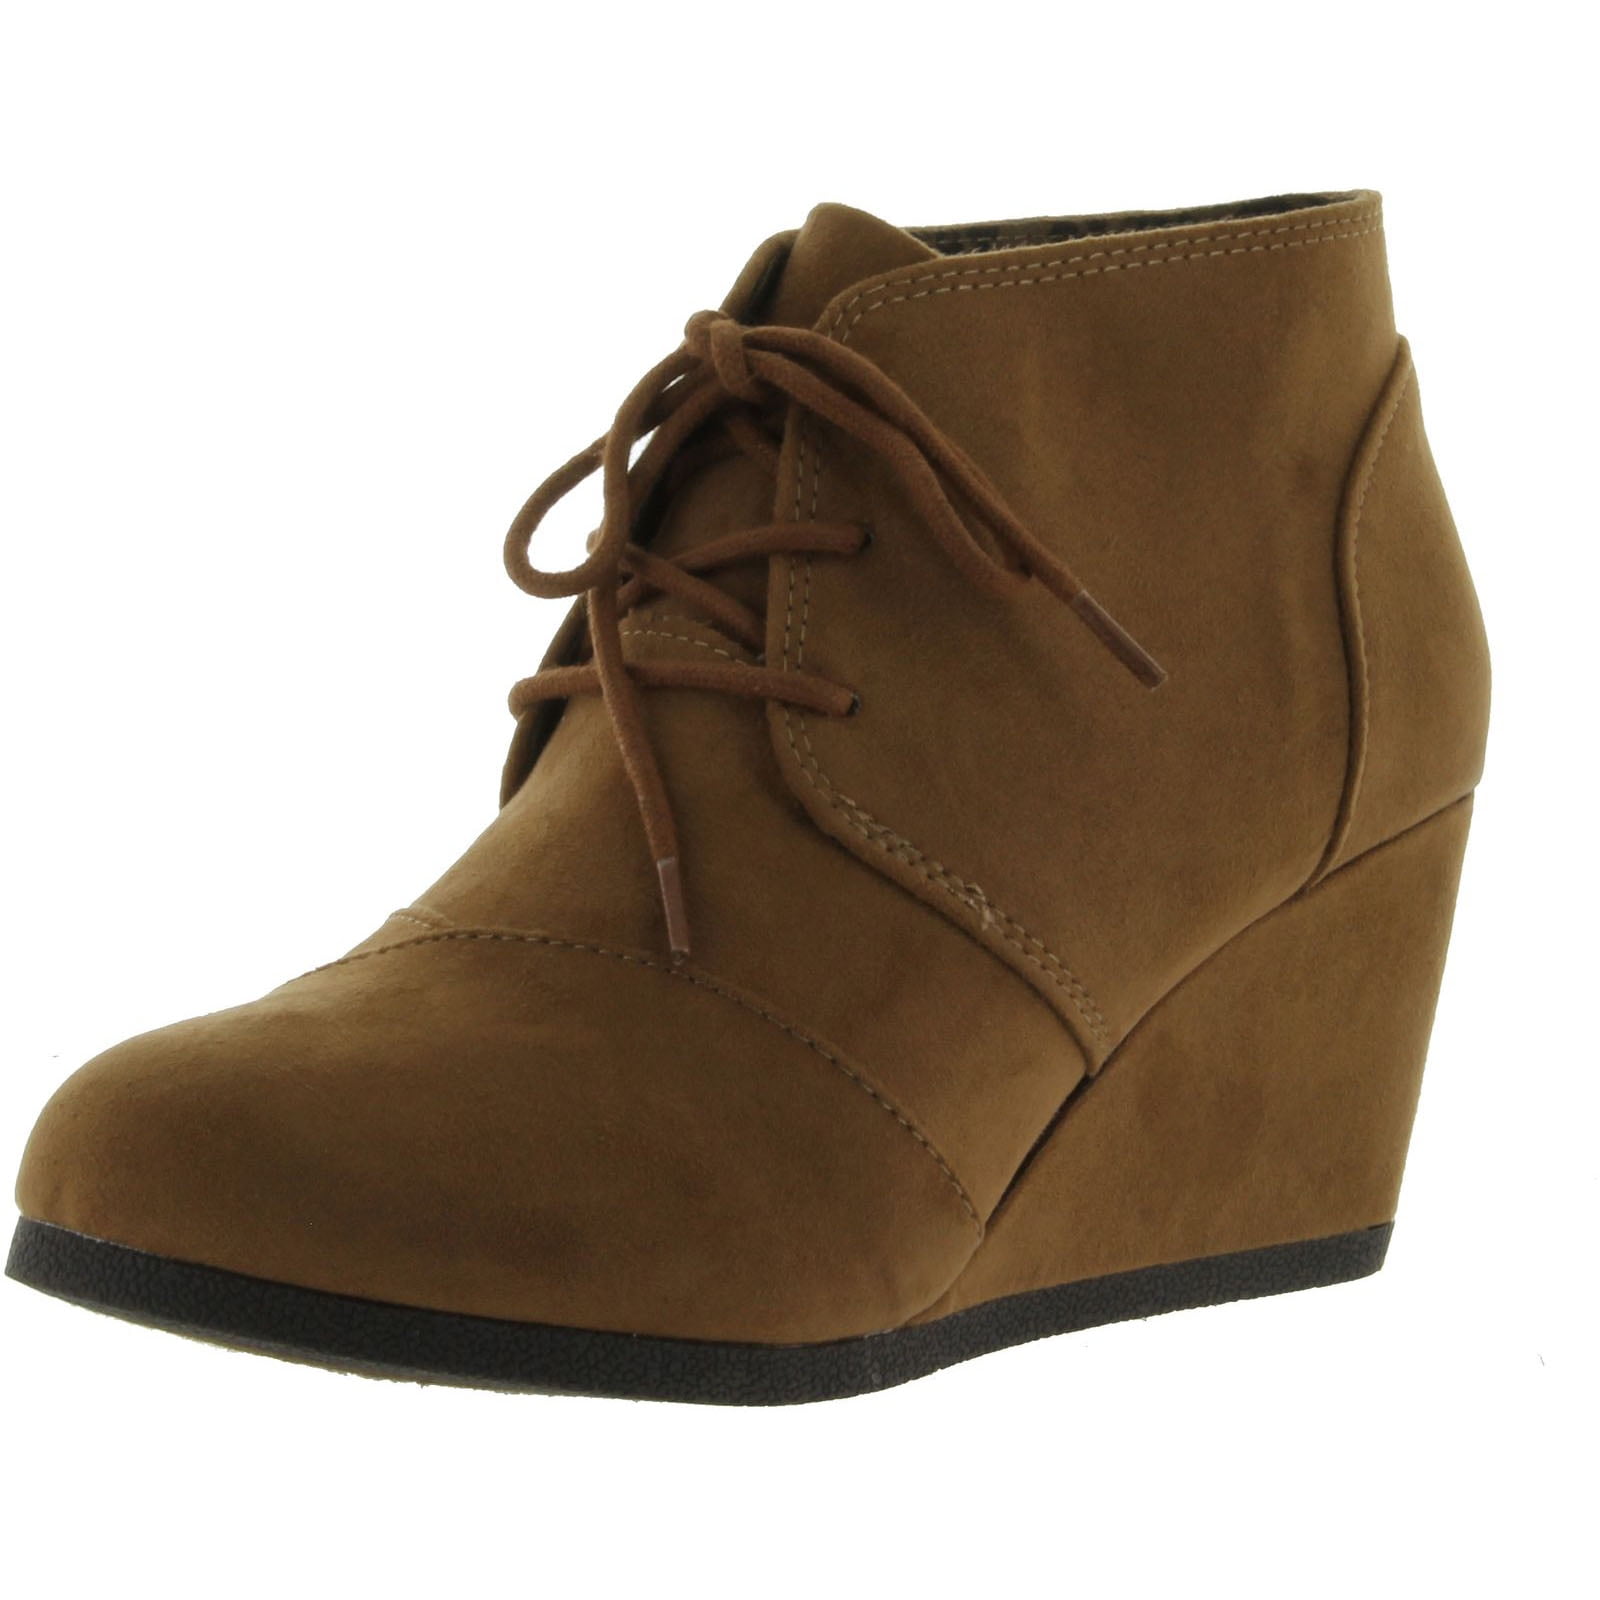 City Classified REX-S Women's Lace Up Wedge High Heel Bootie Boots 